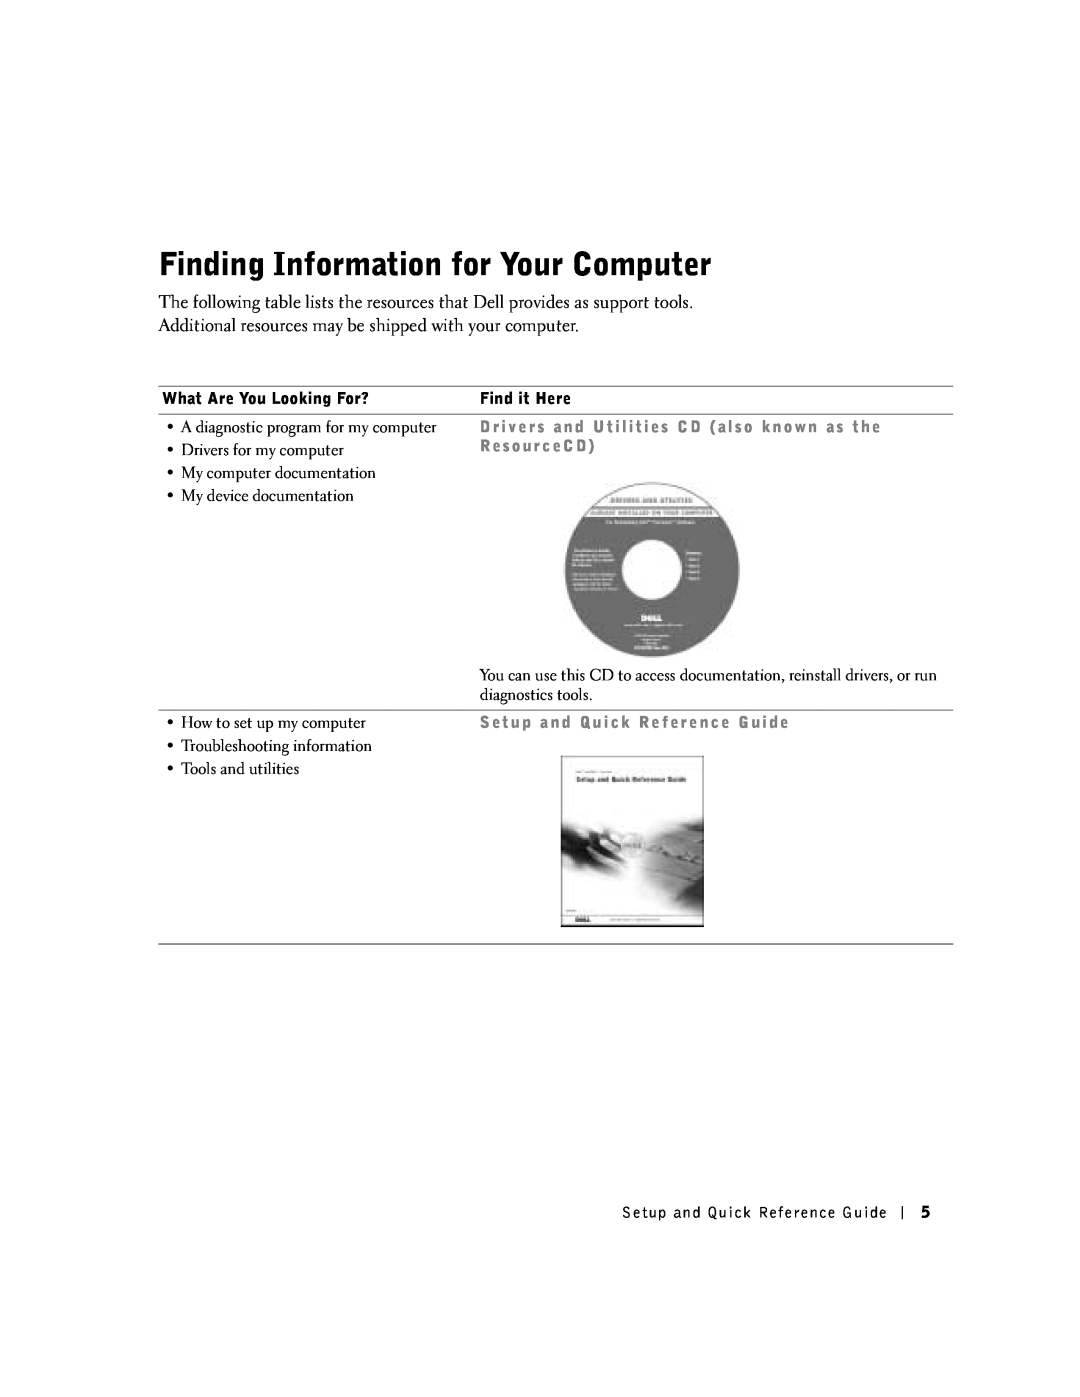 Dell 9T217 manual Finding Information for Your Computer, Additional resources may be shipped with your computer 